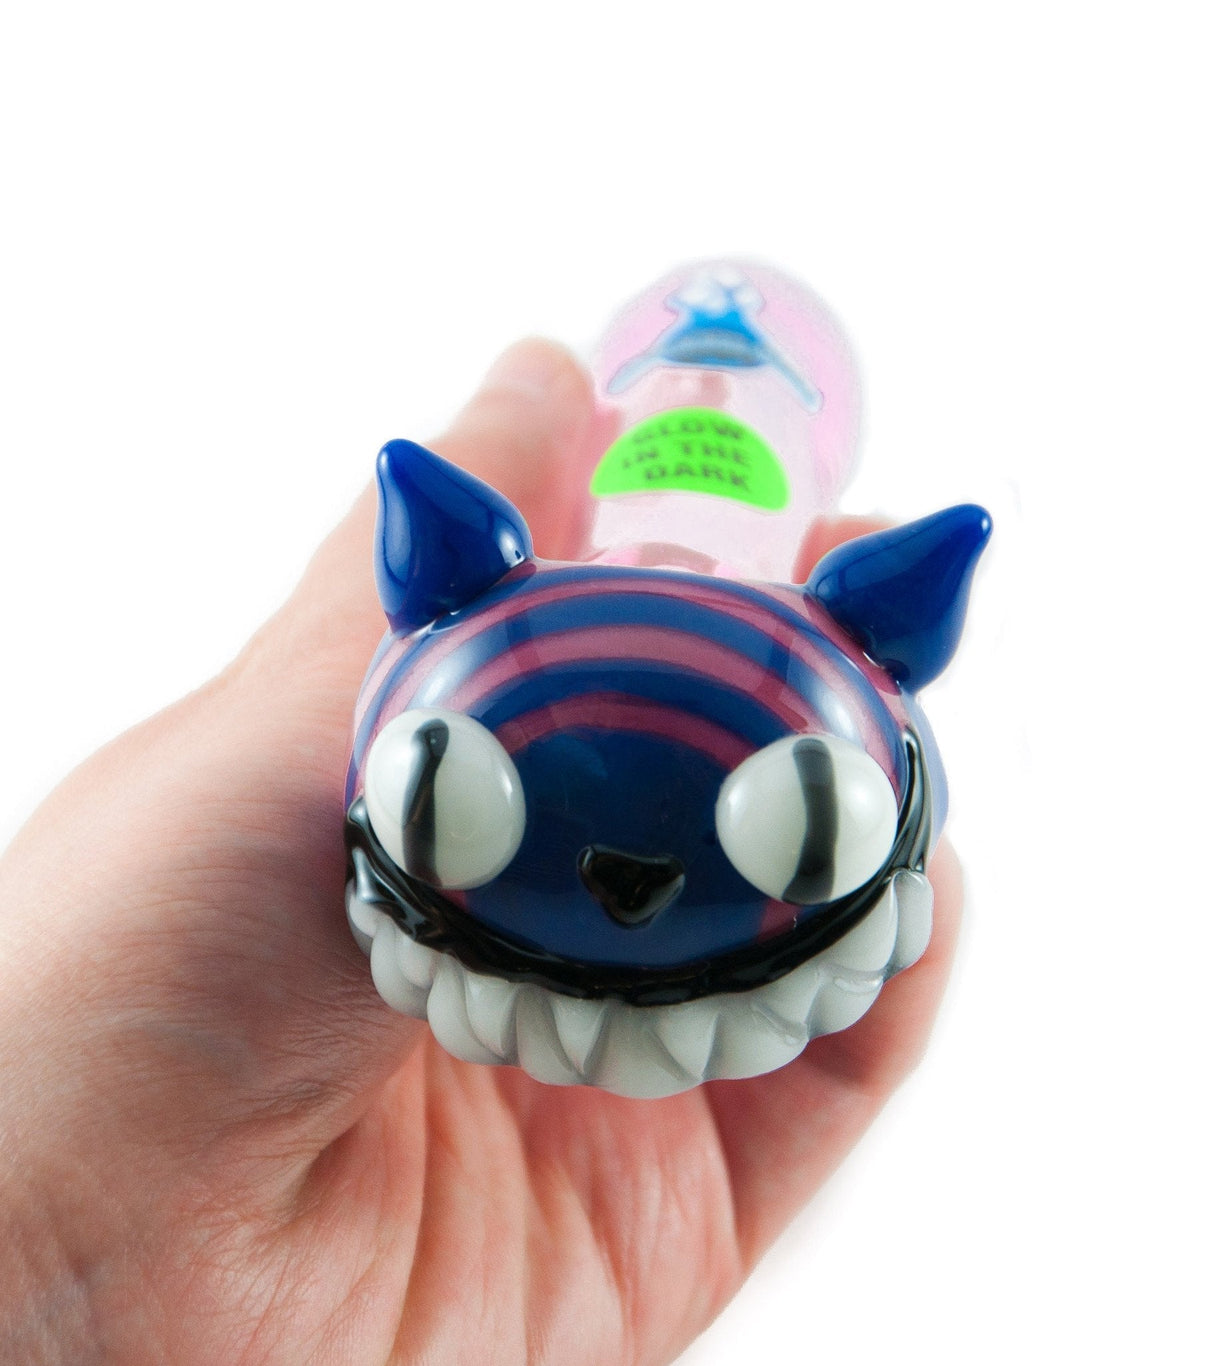 Chameleon Glass Cheshire Cat Pipe with glow-in-the-dark feature, held in hand to show size